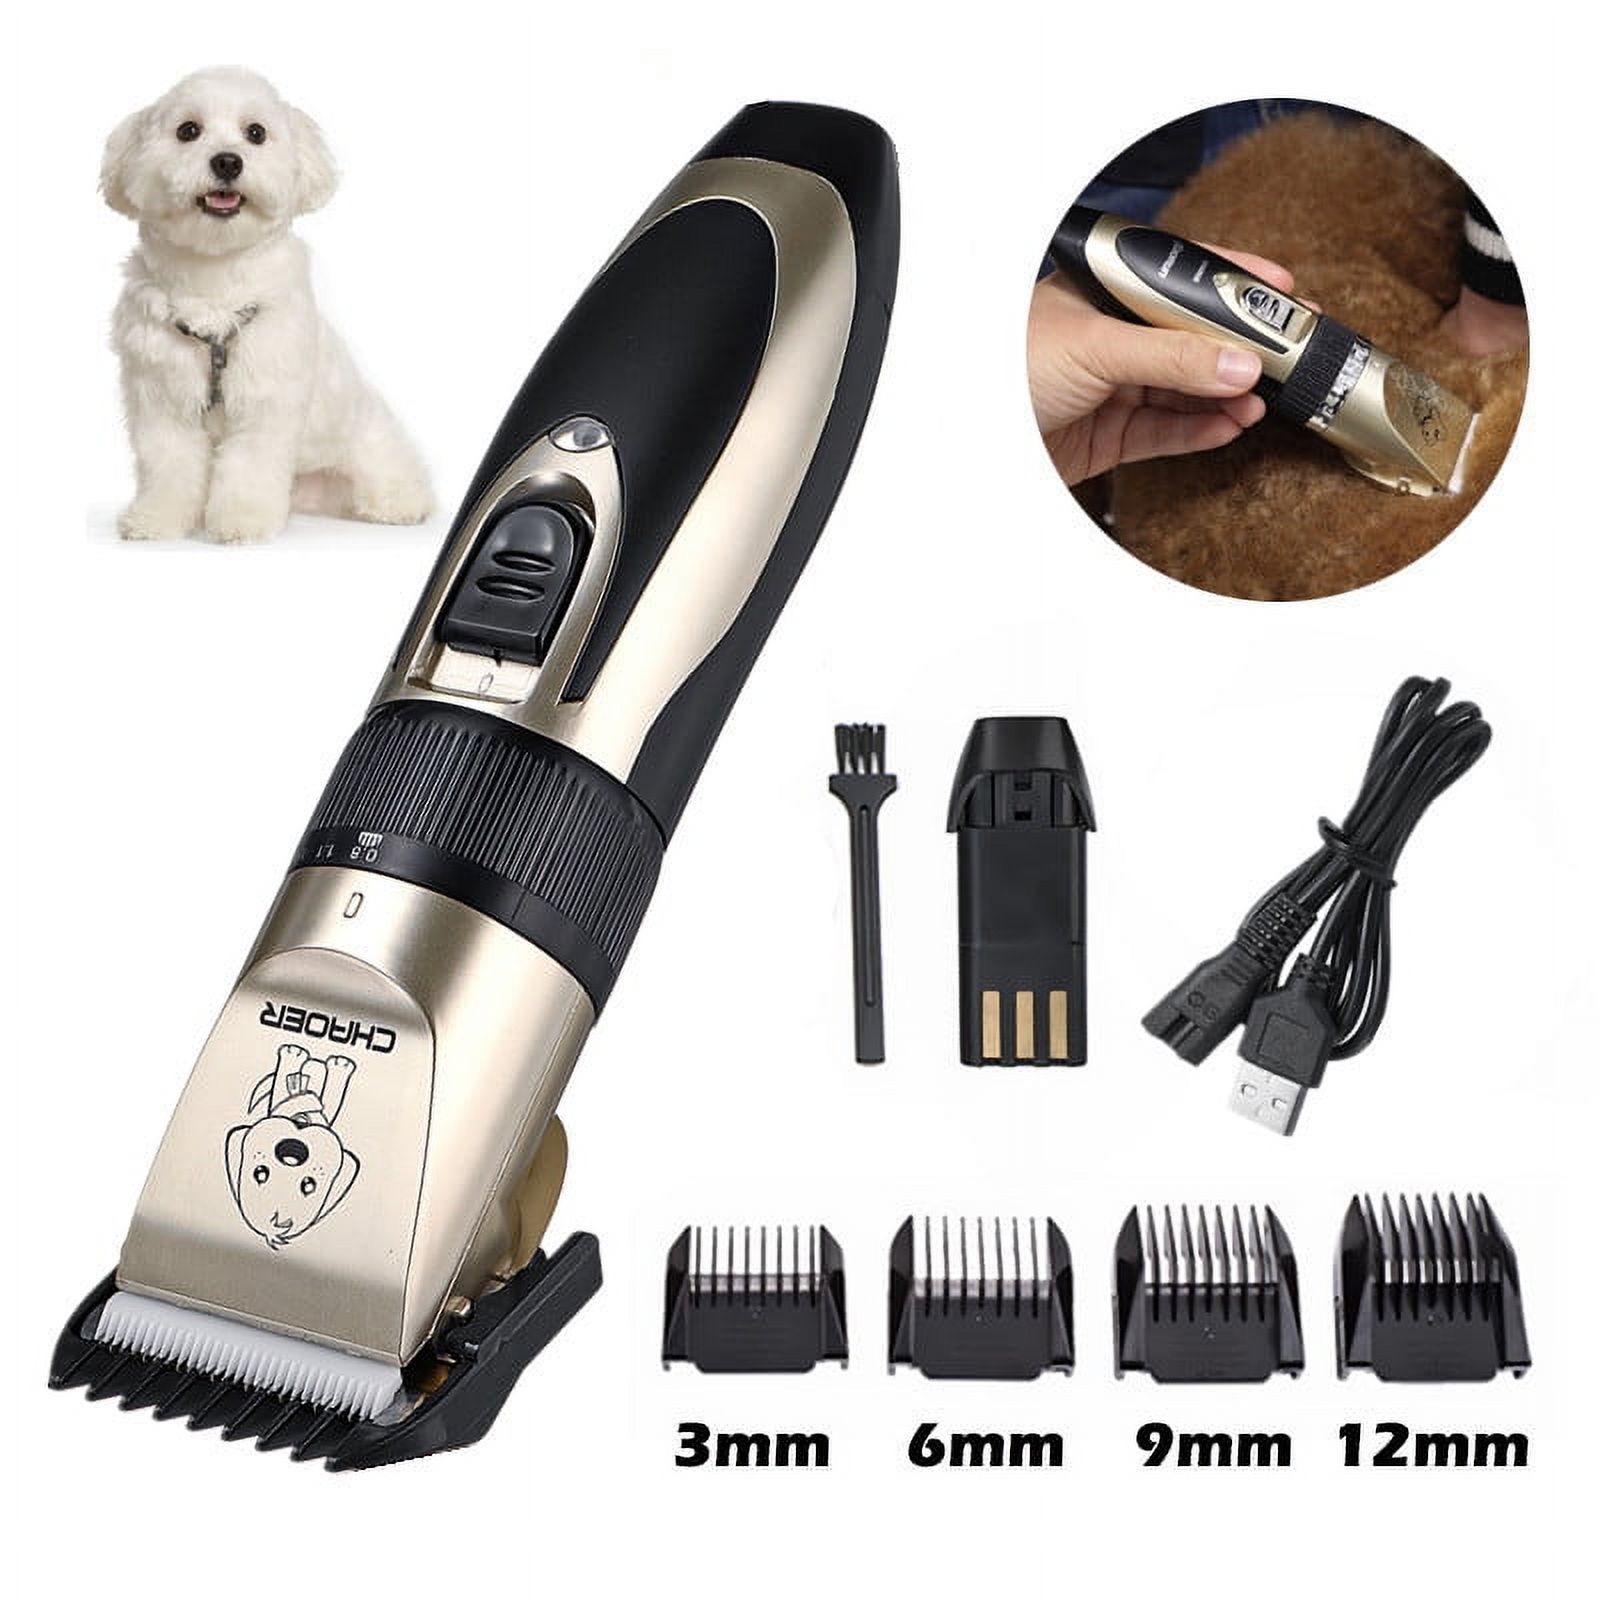 Professional Quiet Electric Pet Hair Clipper Shaver Cordless Grooming Kit for Cat Dog Hair Best Gift - image 1 of 9